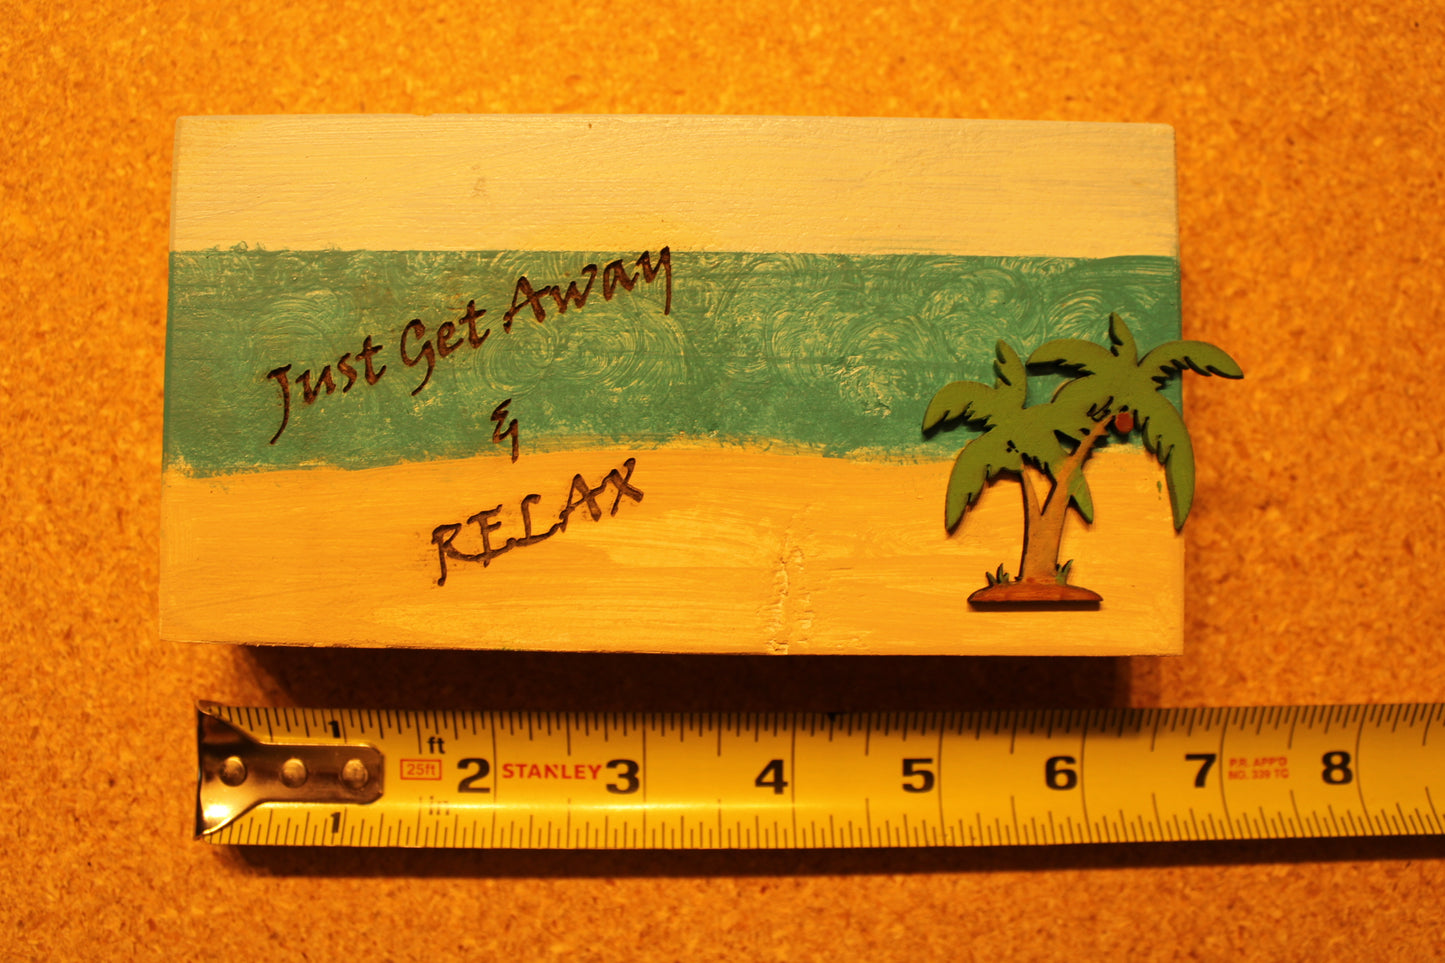 Sign that reads "Just Get Away & Relax" with a beach scenery and palm tree